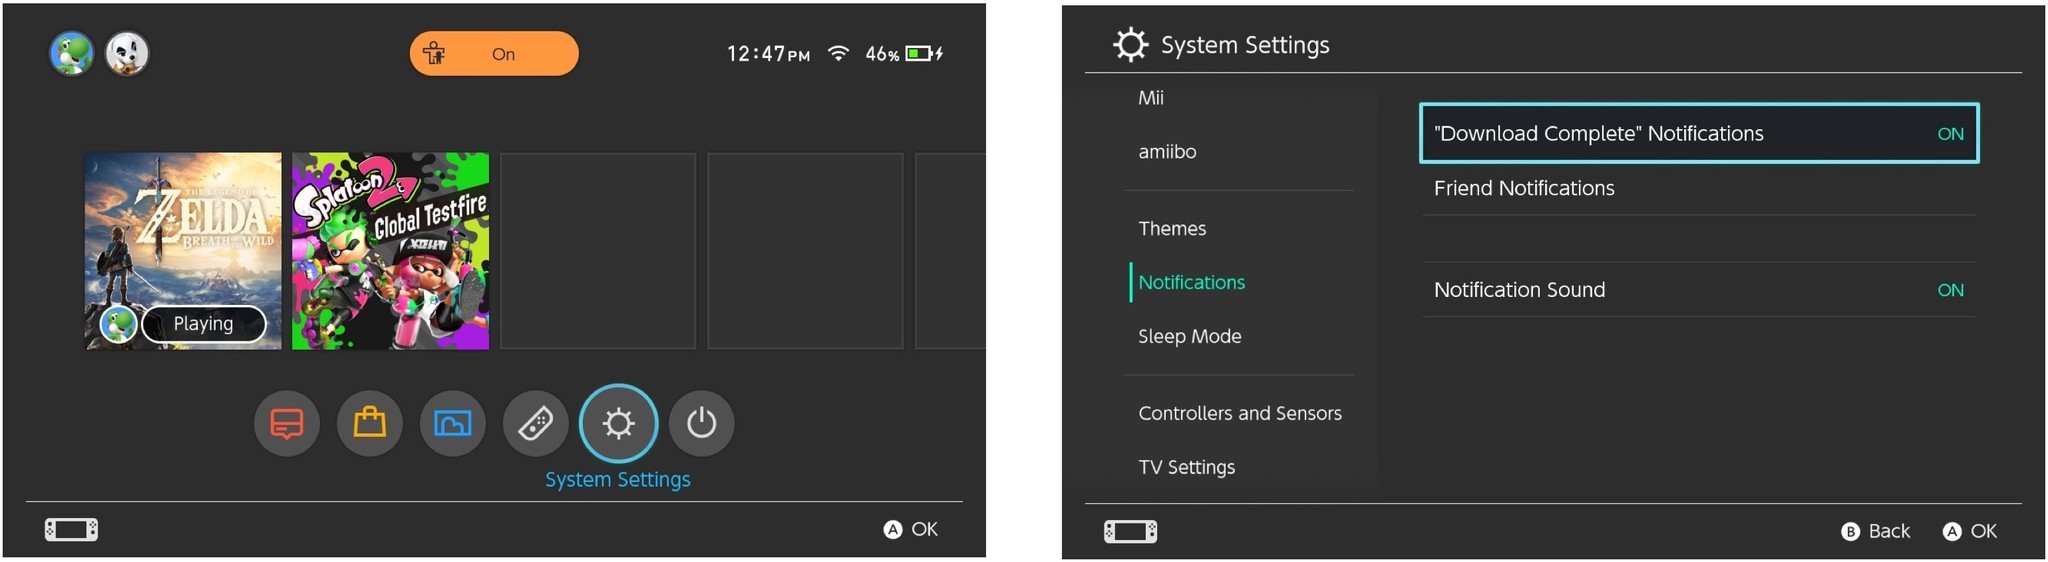 Select System Settings, then select Notifications